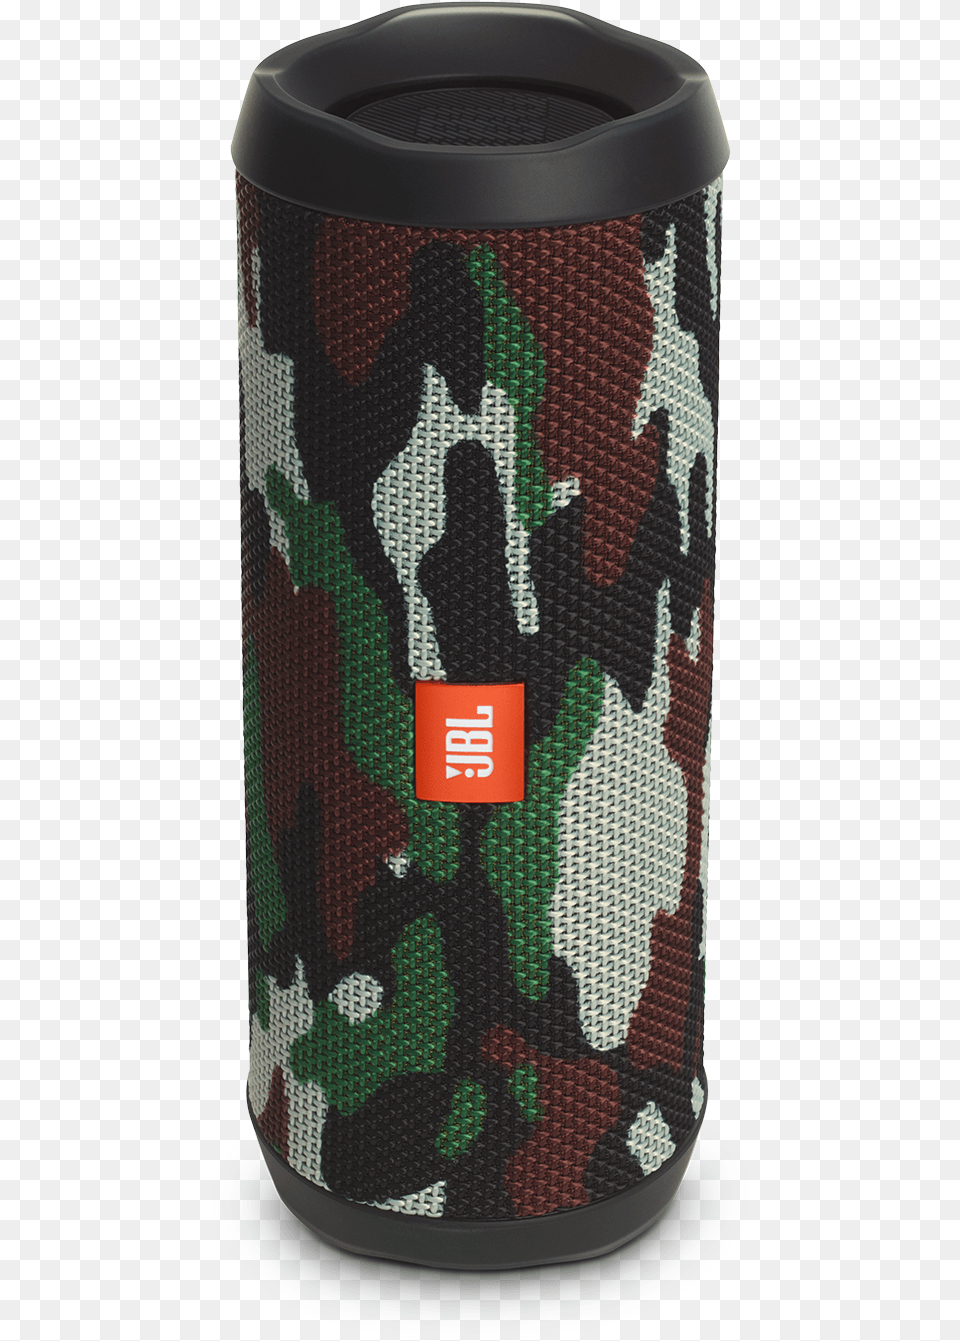 Jbl Flip 4 Special Edition Jbl Price In Sri Lanka, Military, Military Uniform, Person, Camouflage Free Png Download